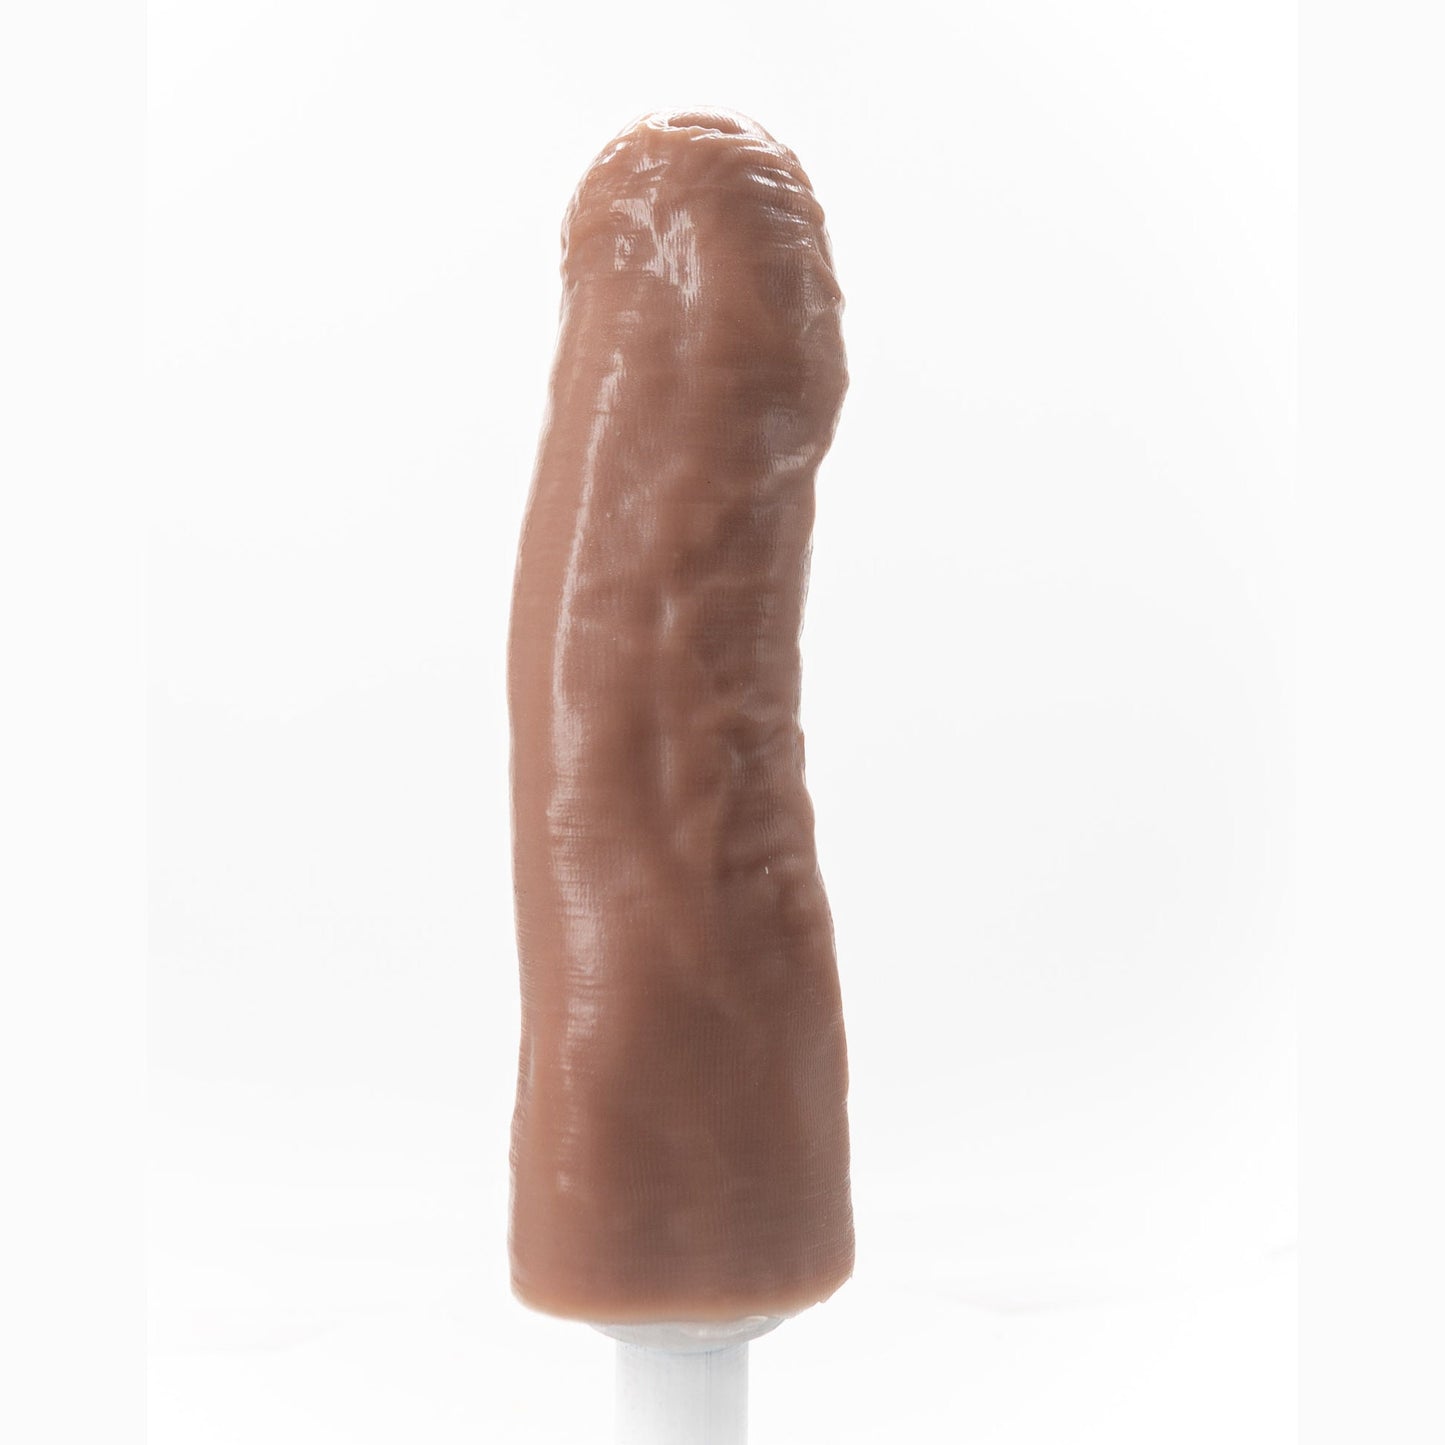 8.5 inch realistic penis sleeve/strap on - modeled after a real guy